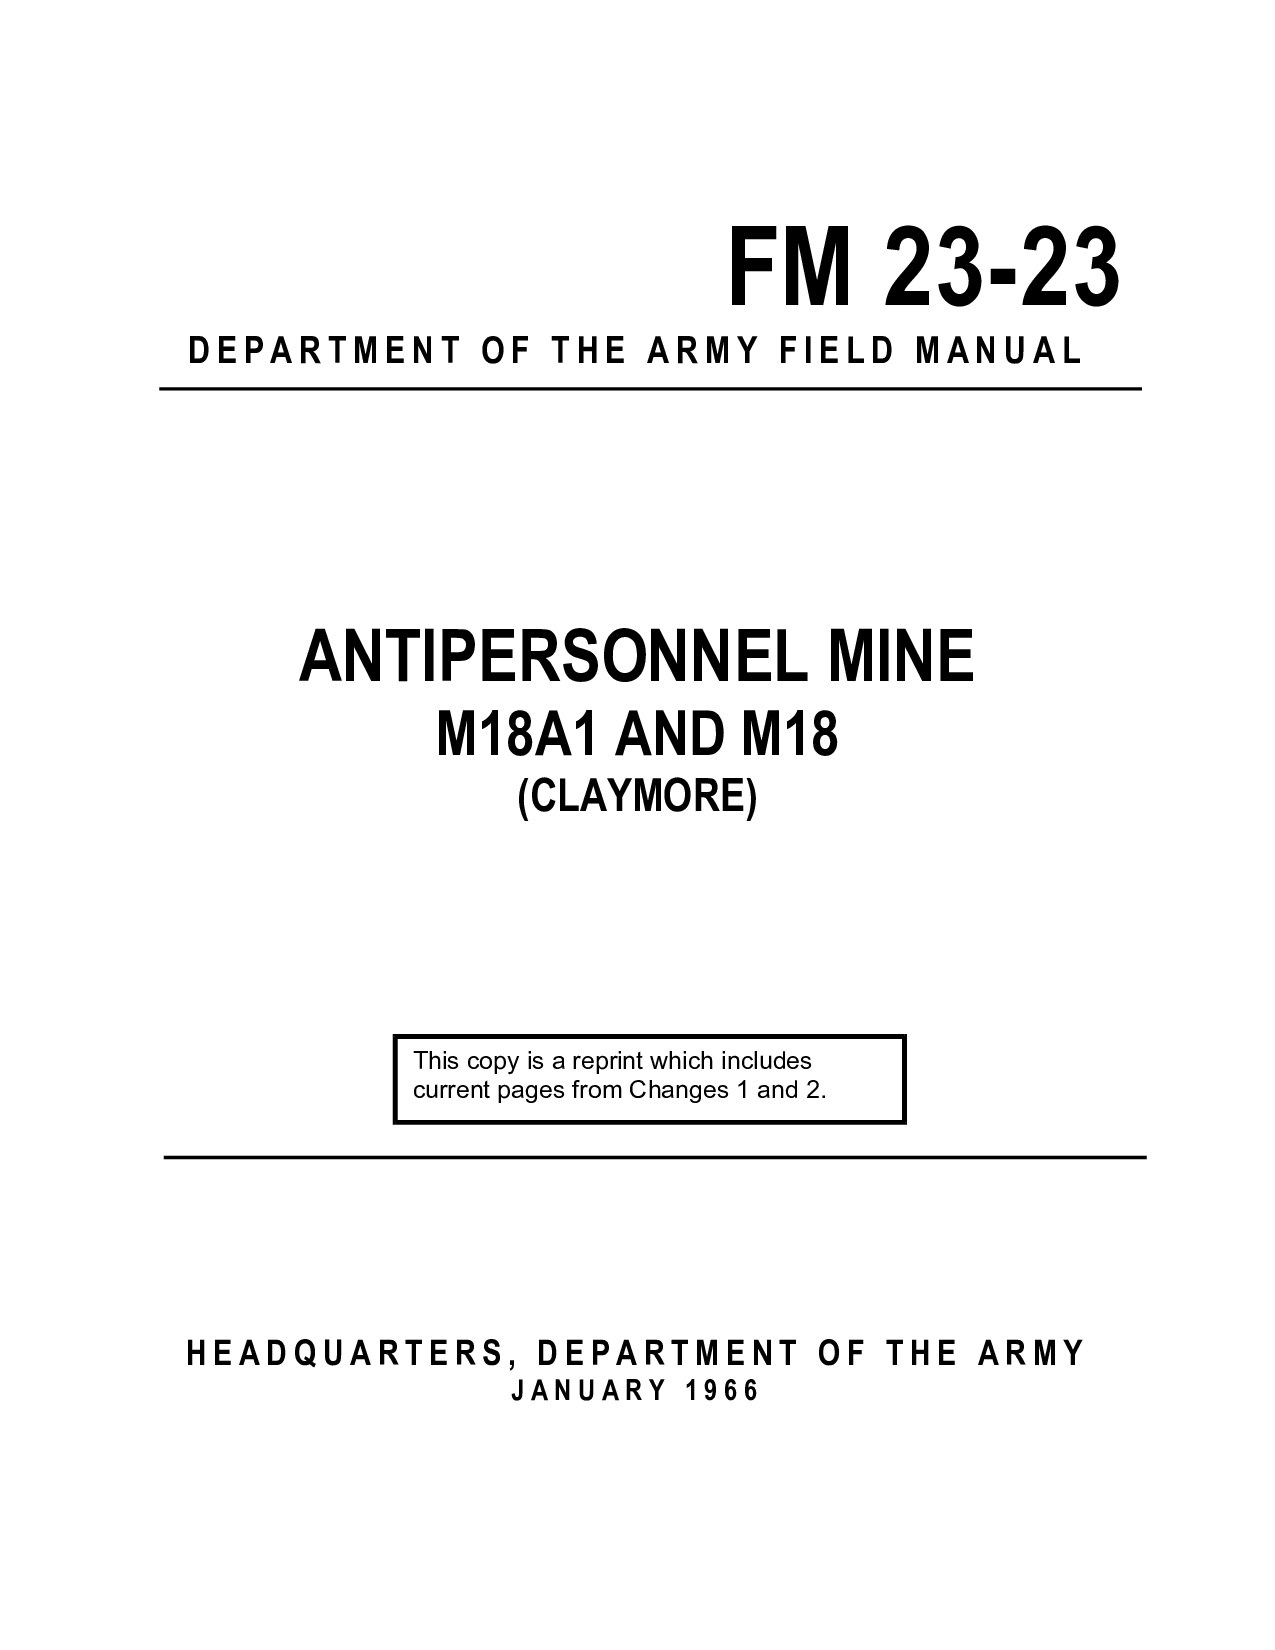 FM 23-23 Antipersonnel Mine M18A1 and M18 (Claymore)